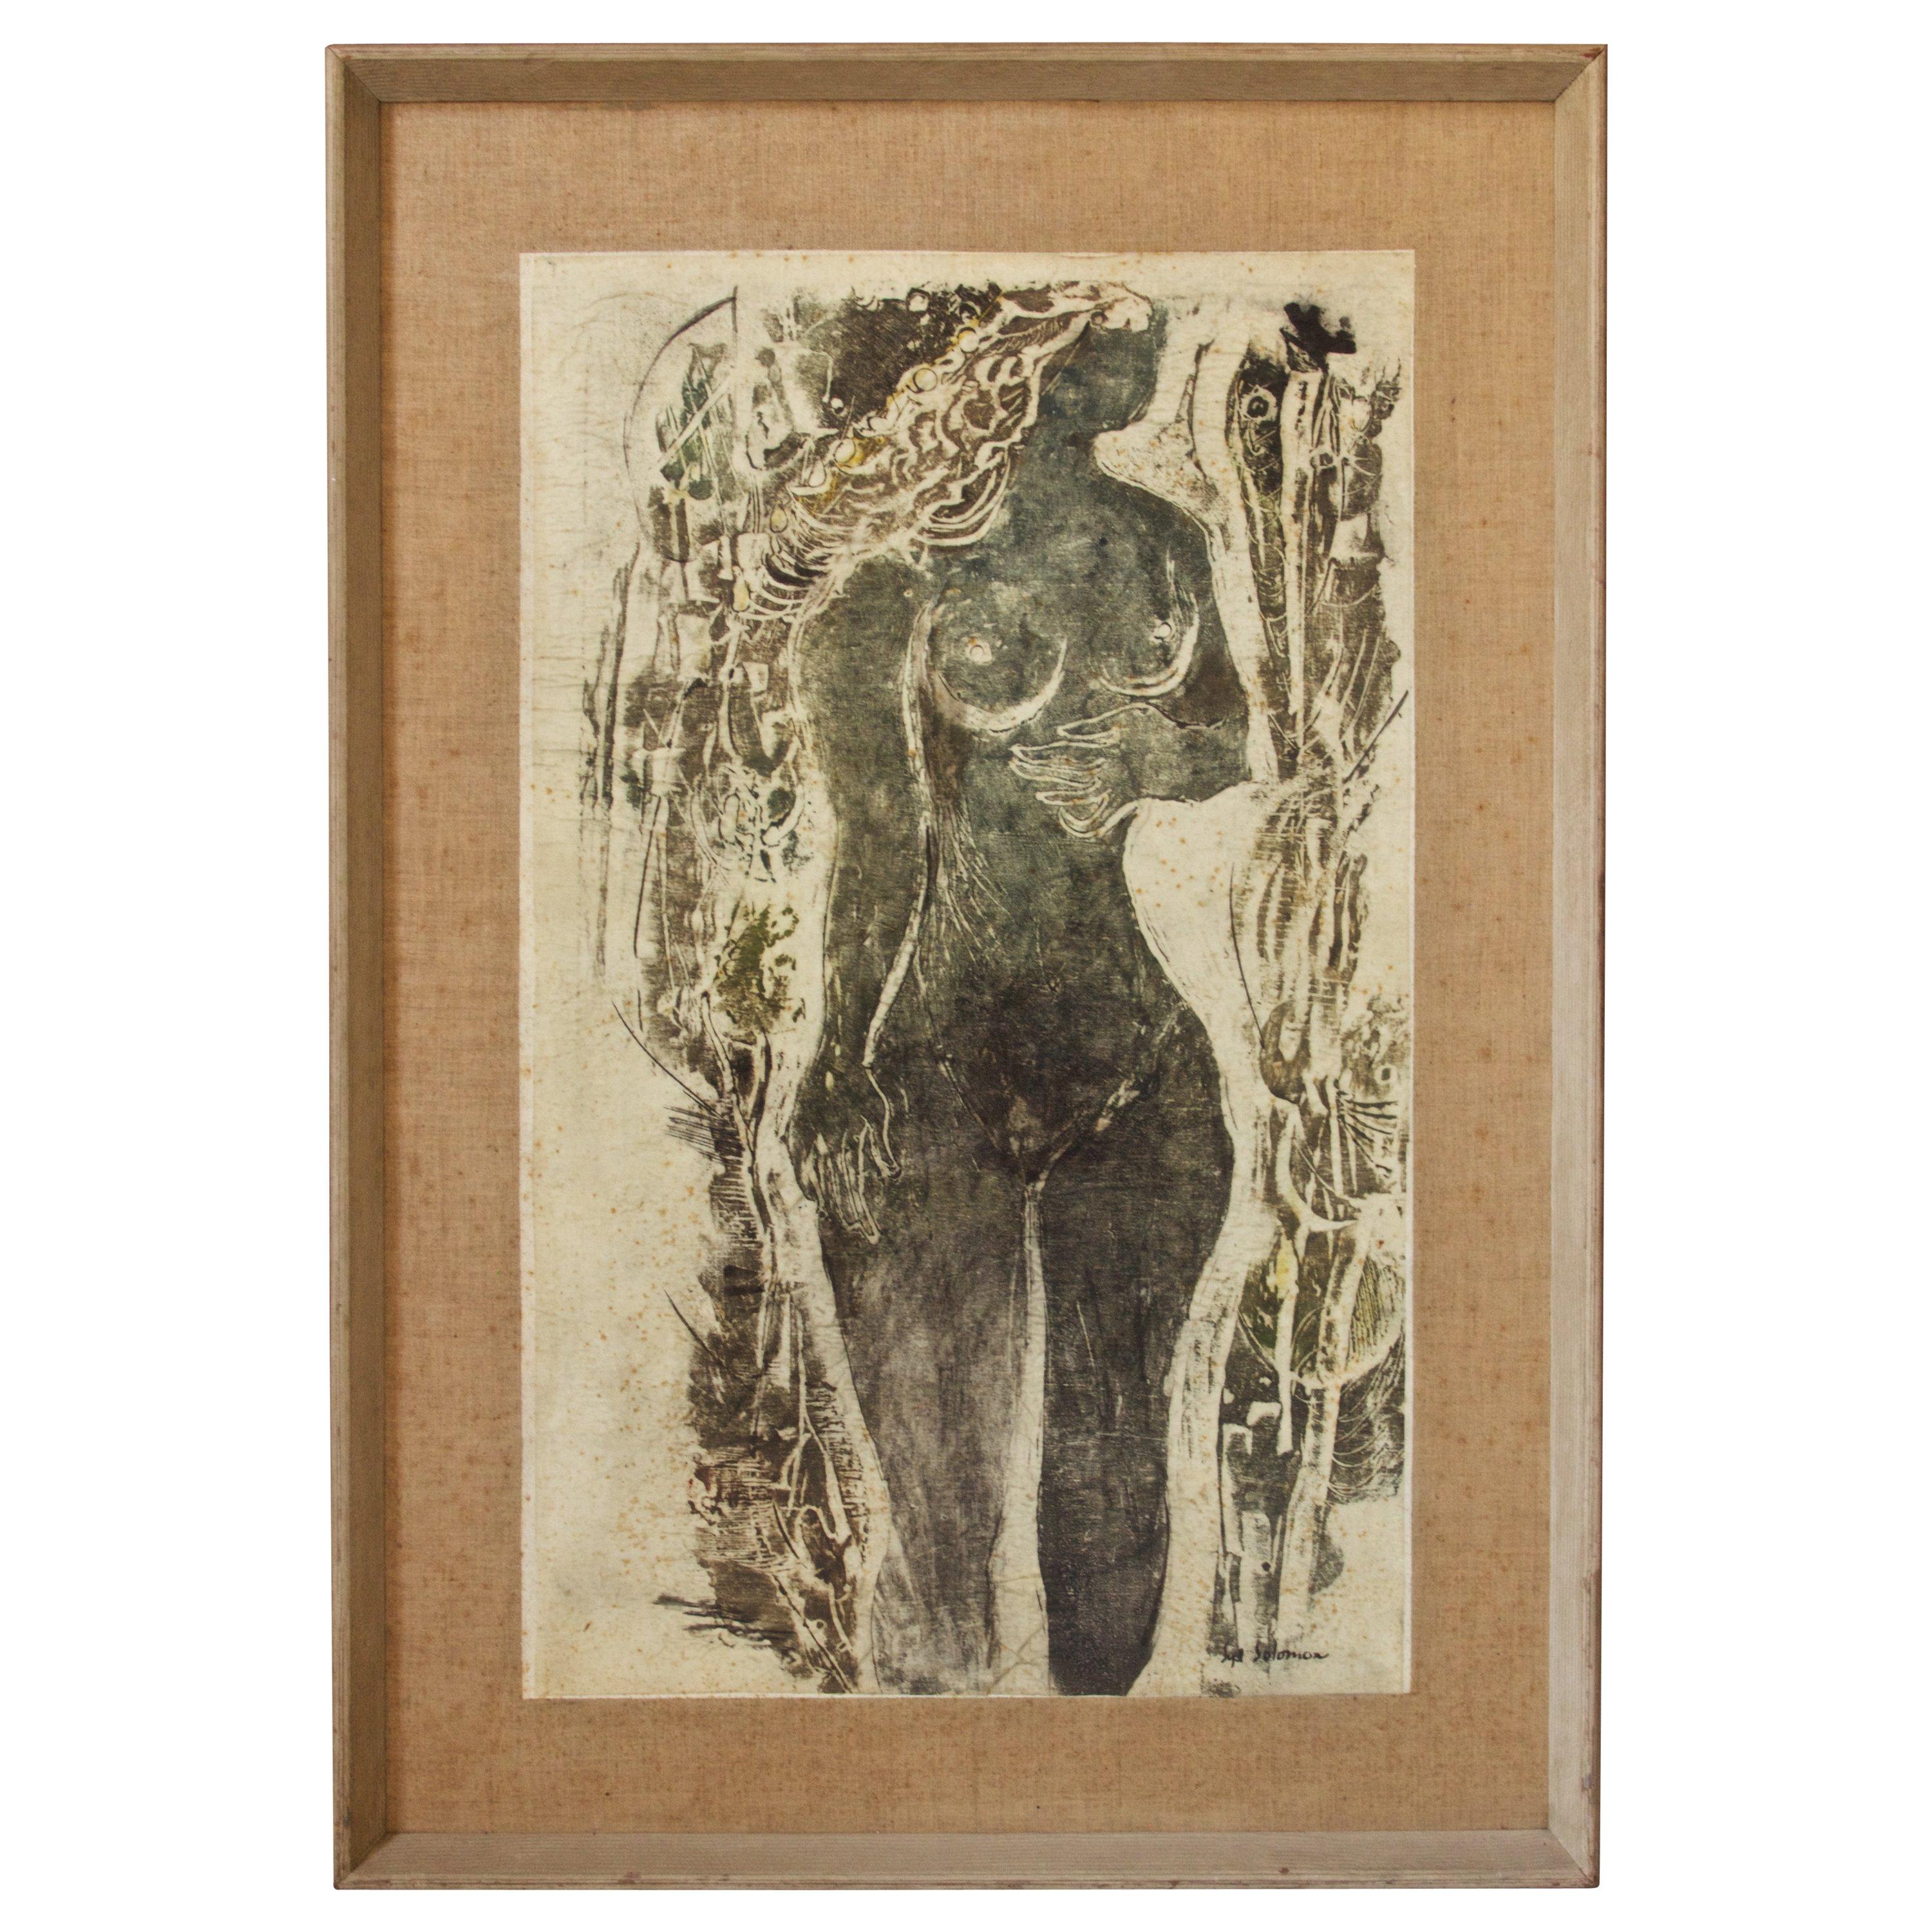 "Young Girl" an Early Clay Lithograph by Syd Solomon, 1957